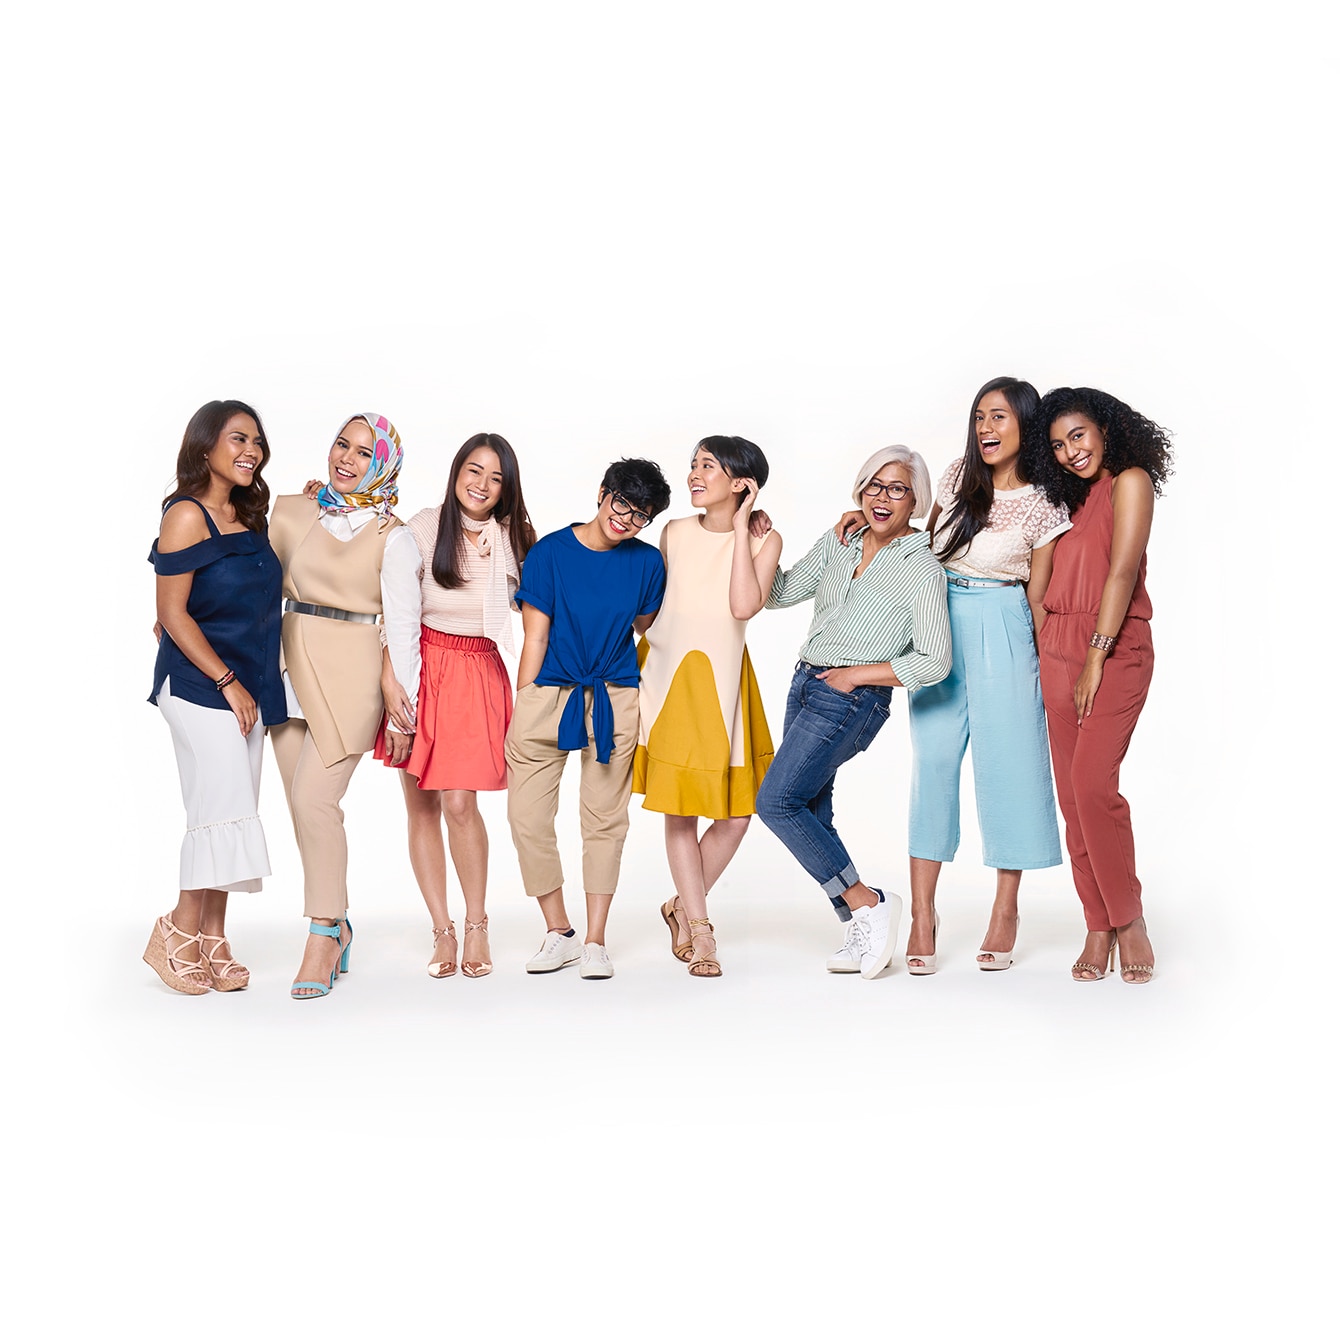 #IamRealBeauty – casting the diverse women of Malaysia for the next Dove campaign